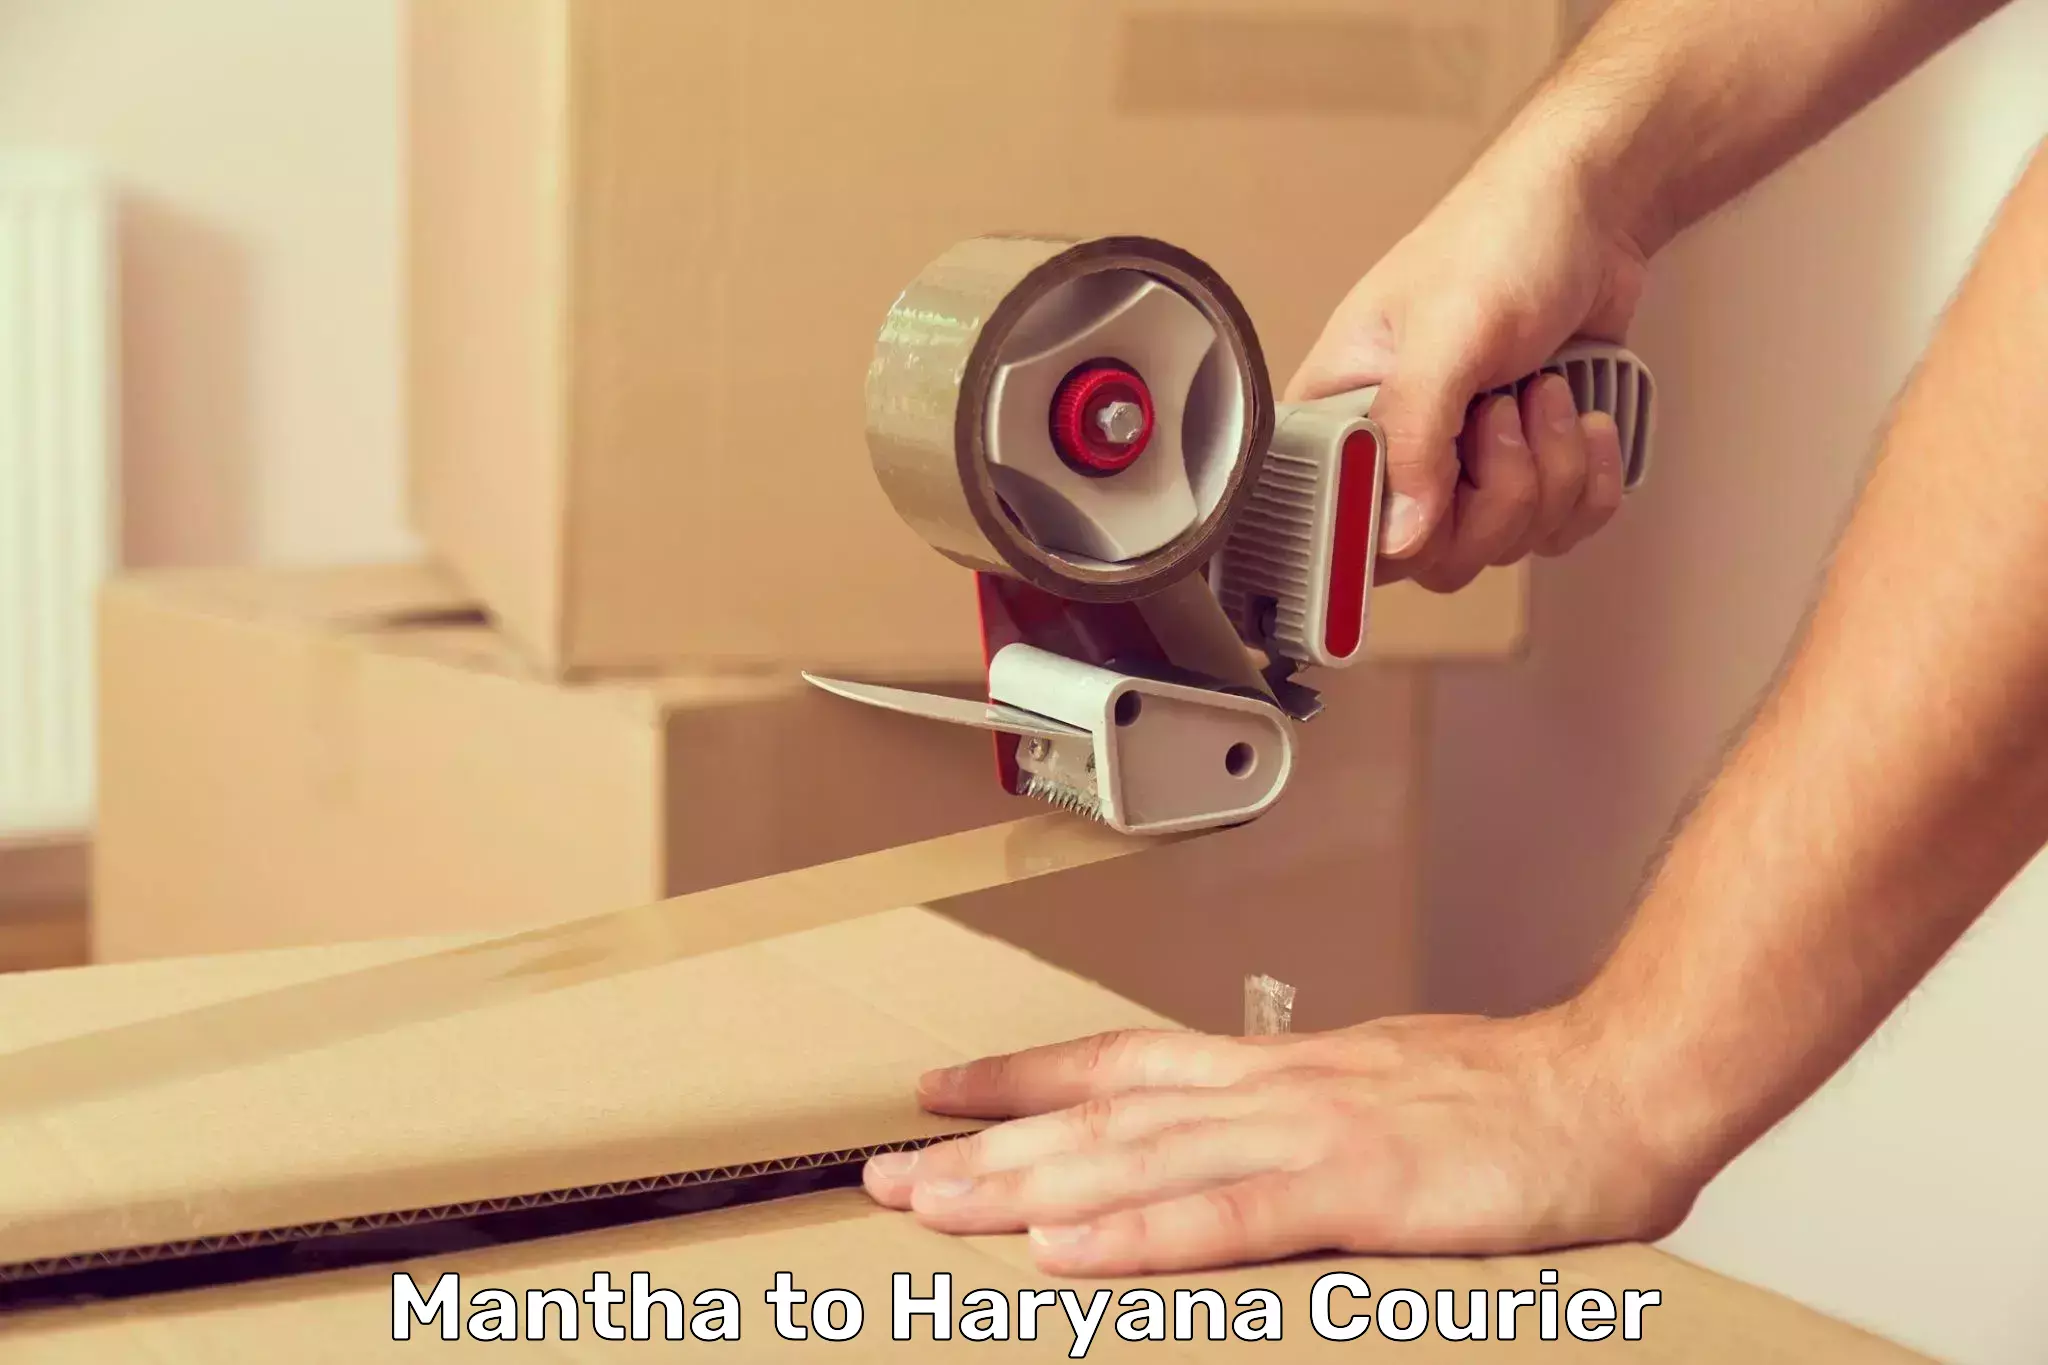 Fast delivery service Mantha to Haryana